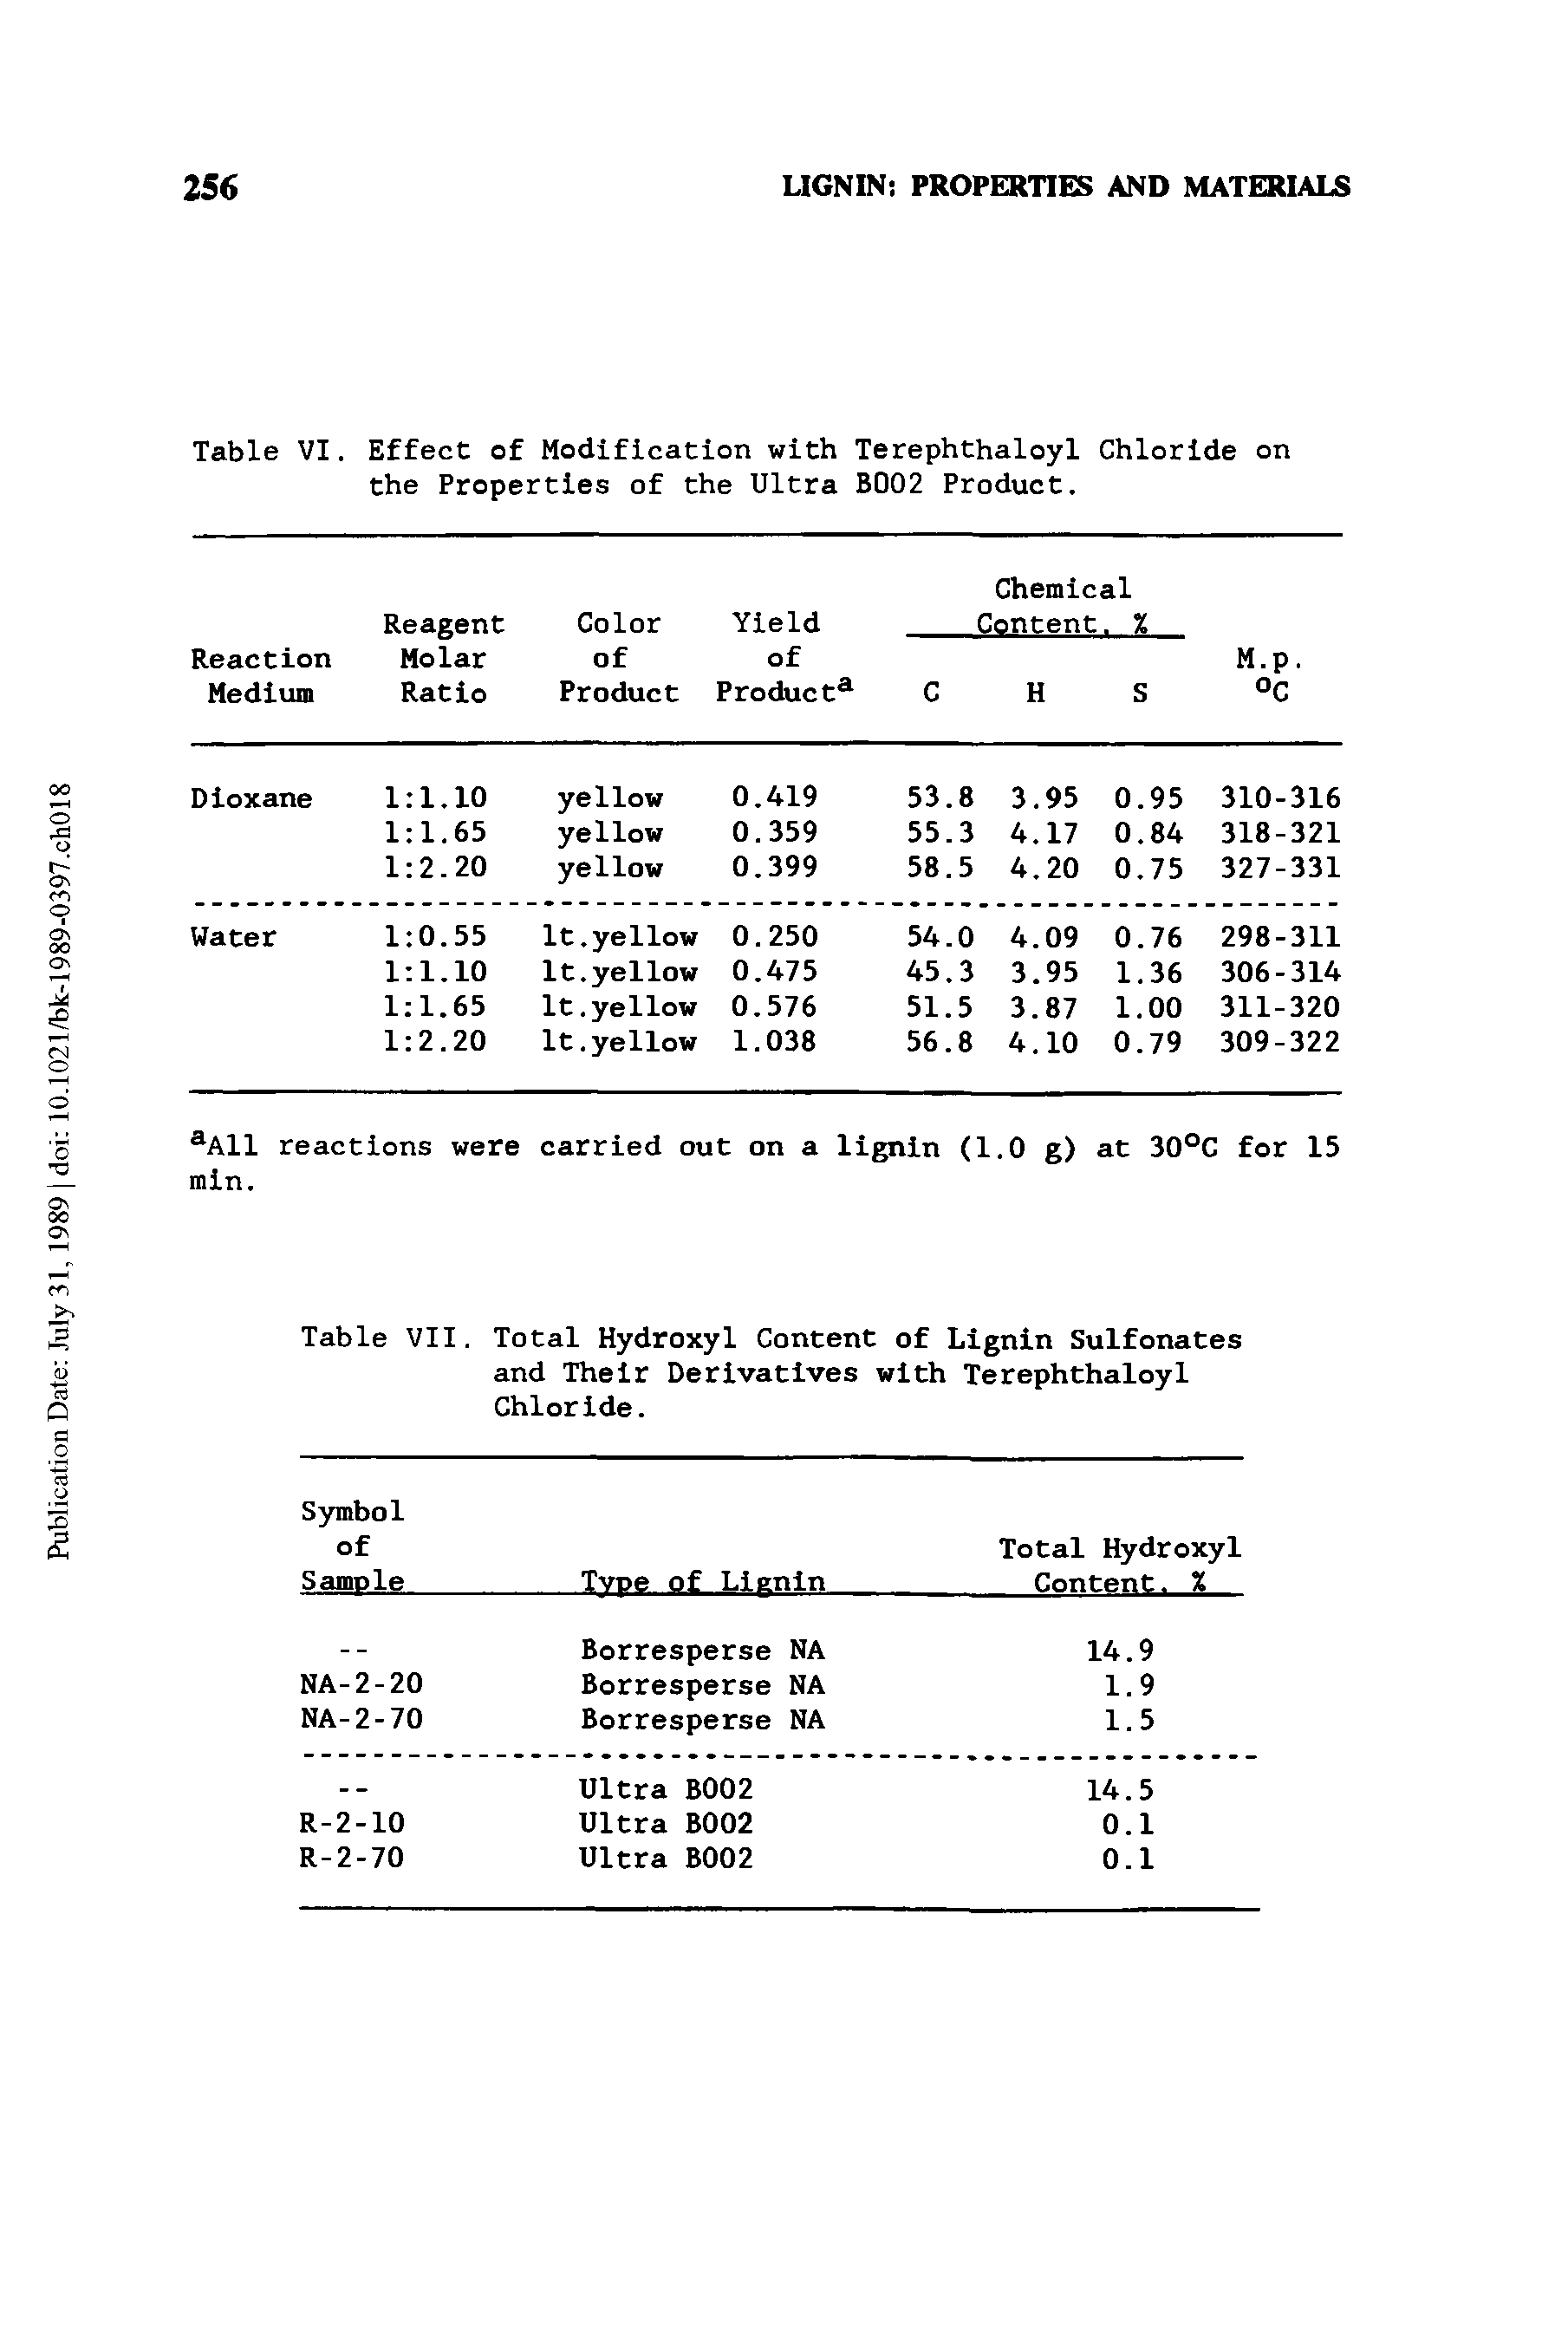 Table VII. Total Hydroxyl Content of Lignin Sulfonates and Their Derivatives with Terephthaloyl Chloride.